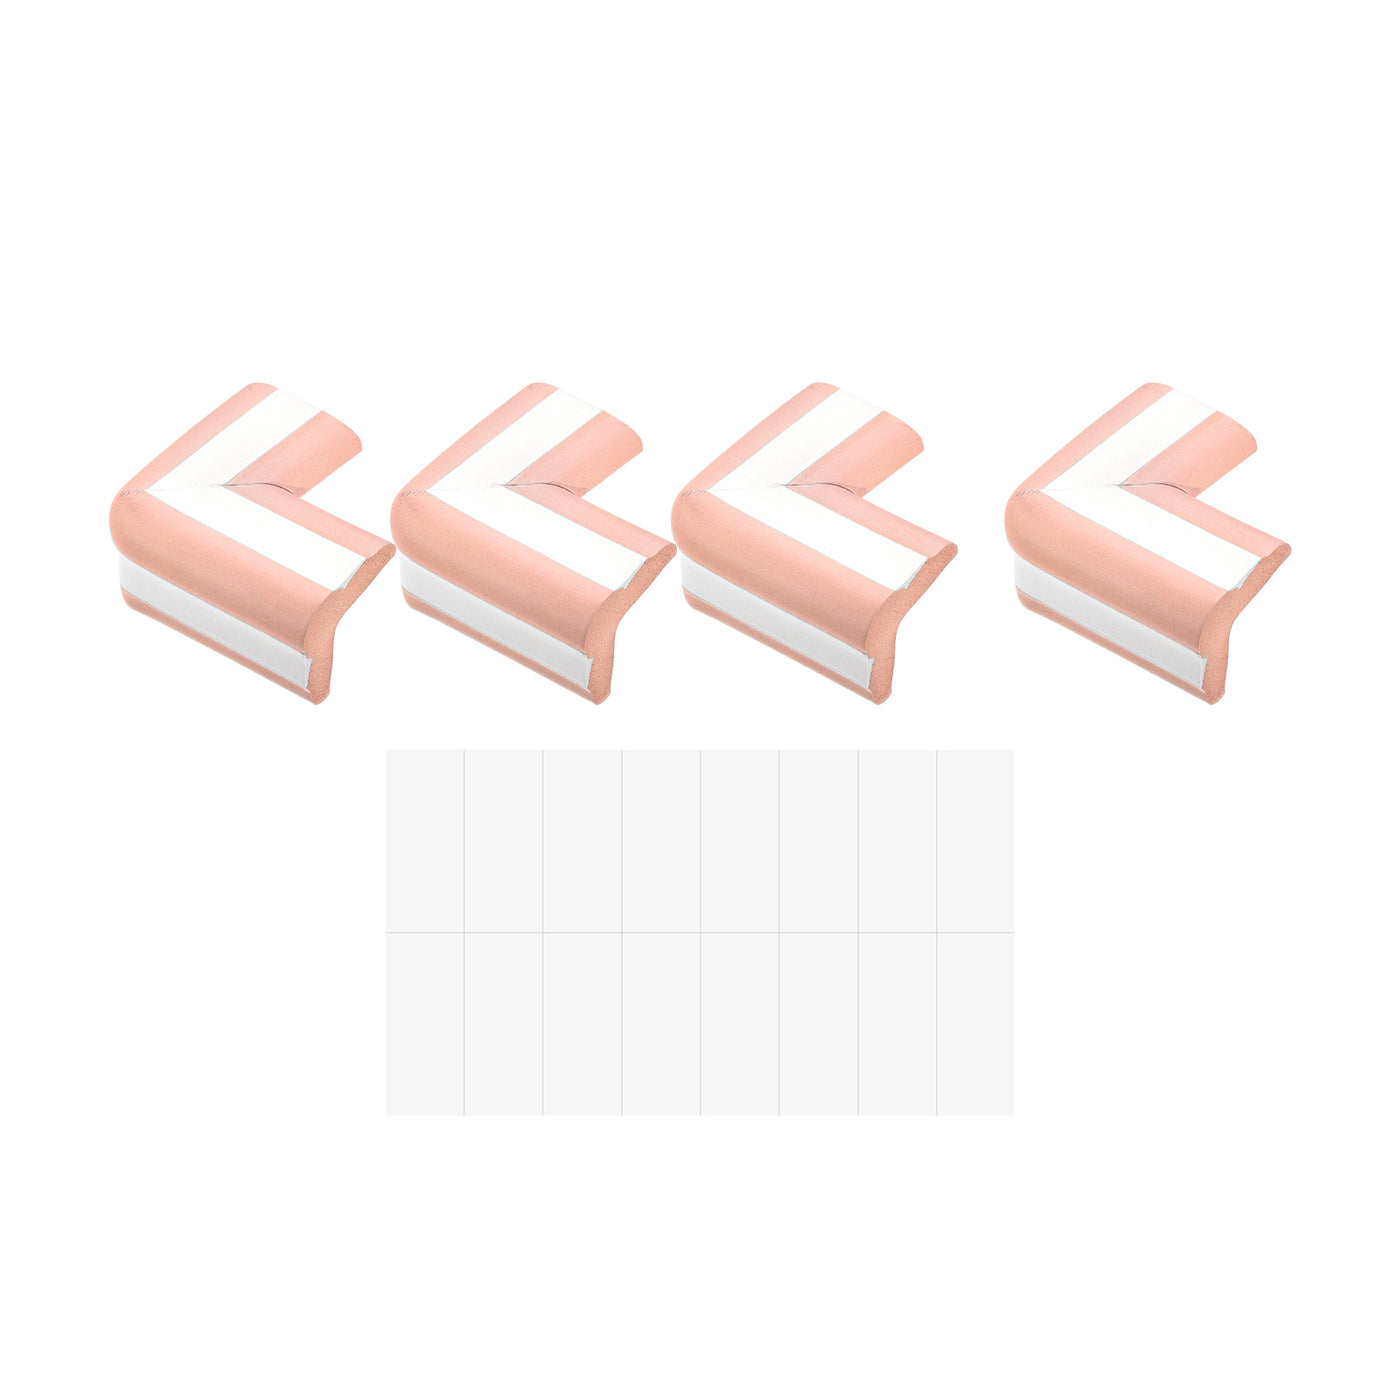 uxcell Uxcell Corner Guards Edge Protectors, 12Pack Foam Bumper Thicken, 60mm White Pink